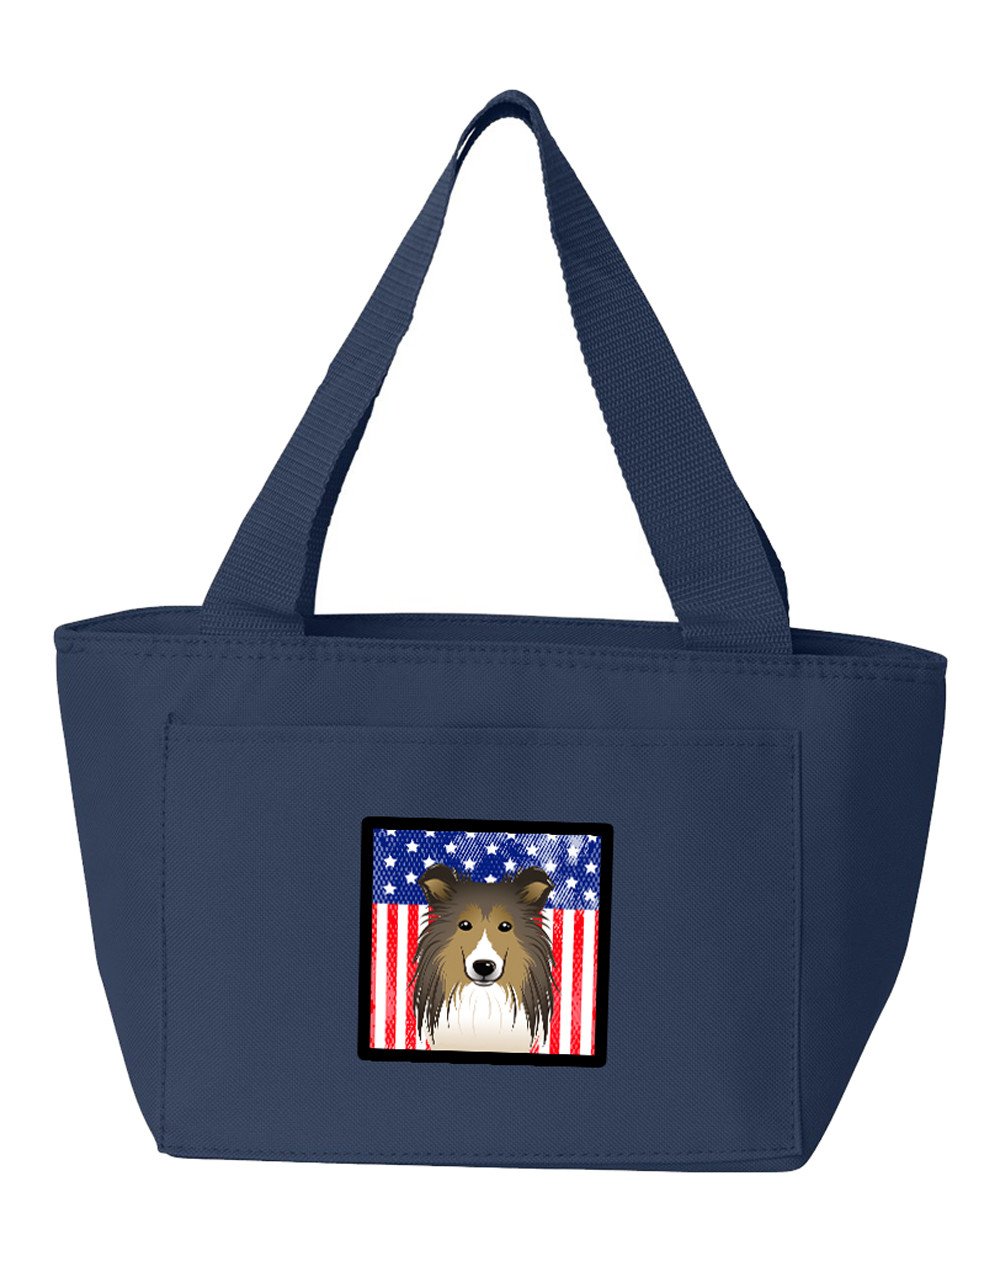 American Flag and Sheltie Lunch Bag BB2172NA-8808 by Caroline's Treasures